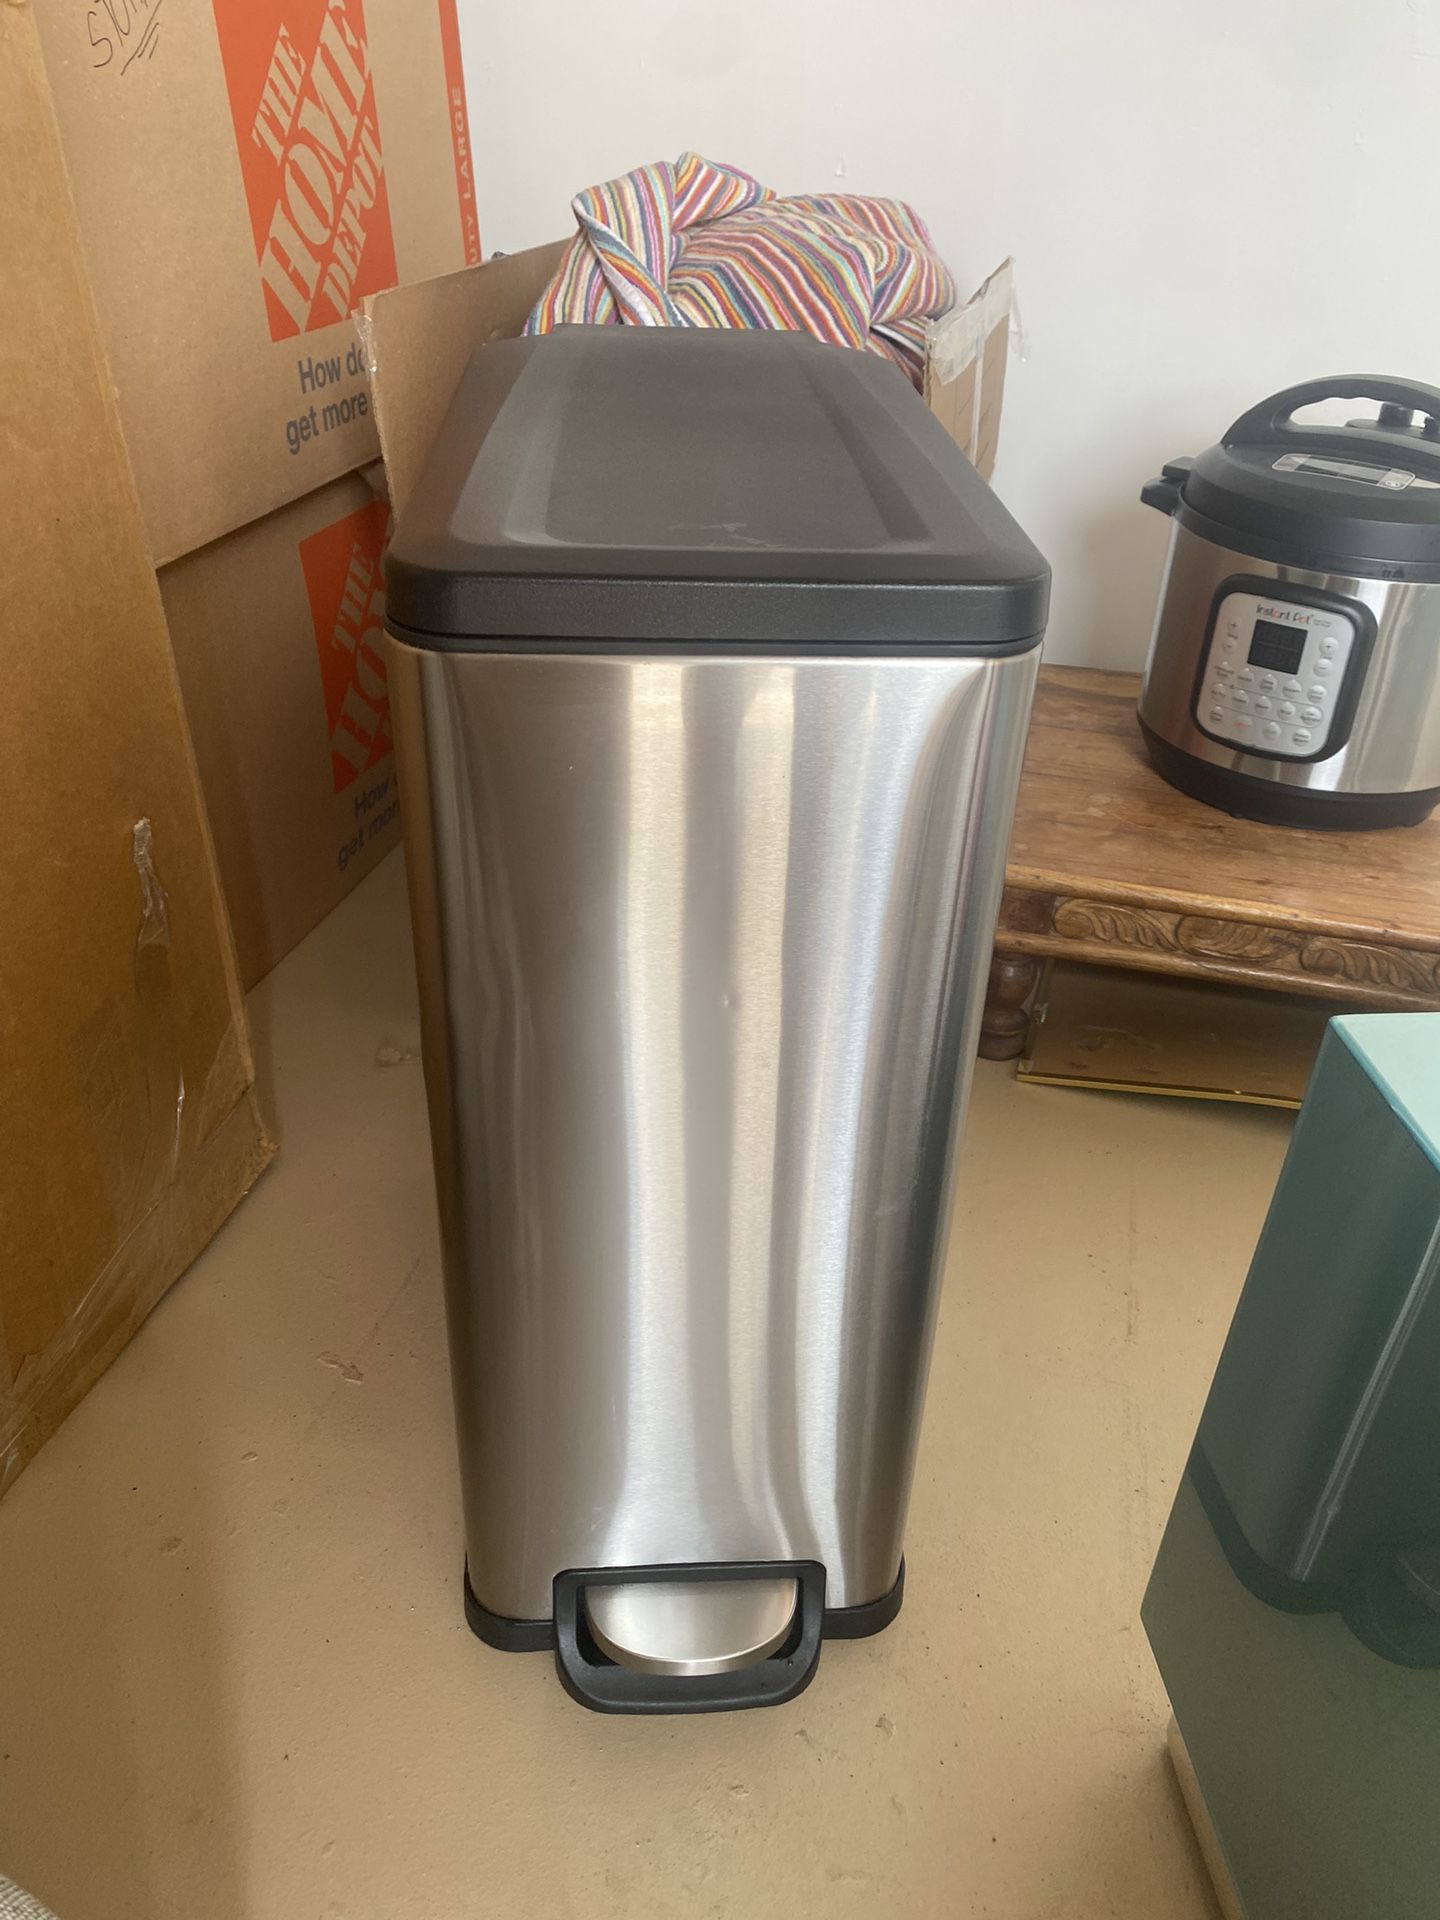 Large Aluminum Step-on Trash Can